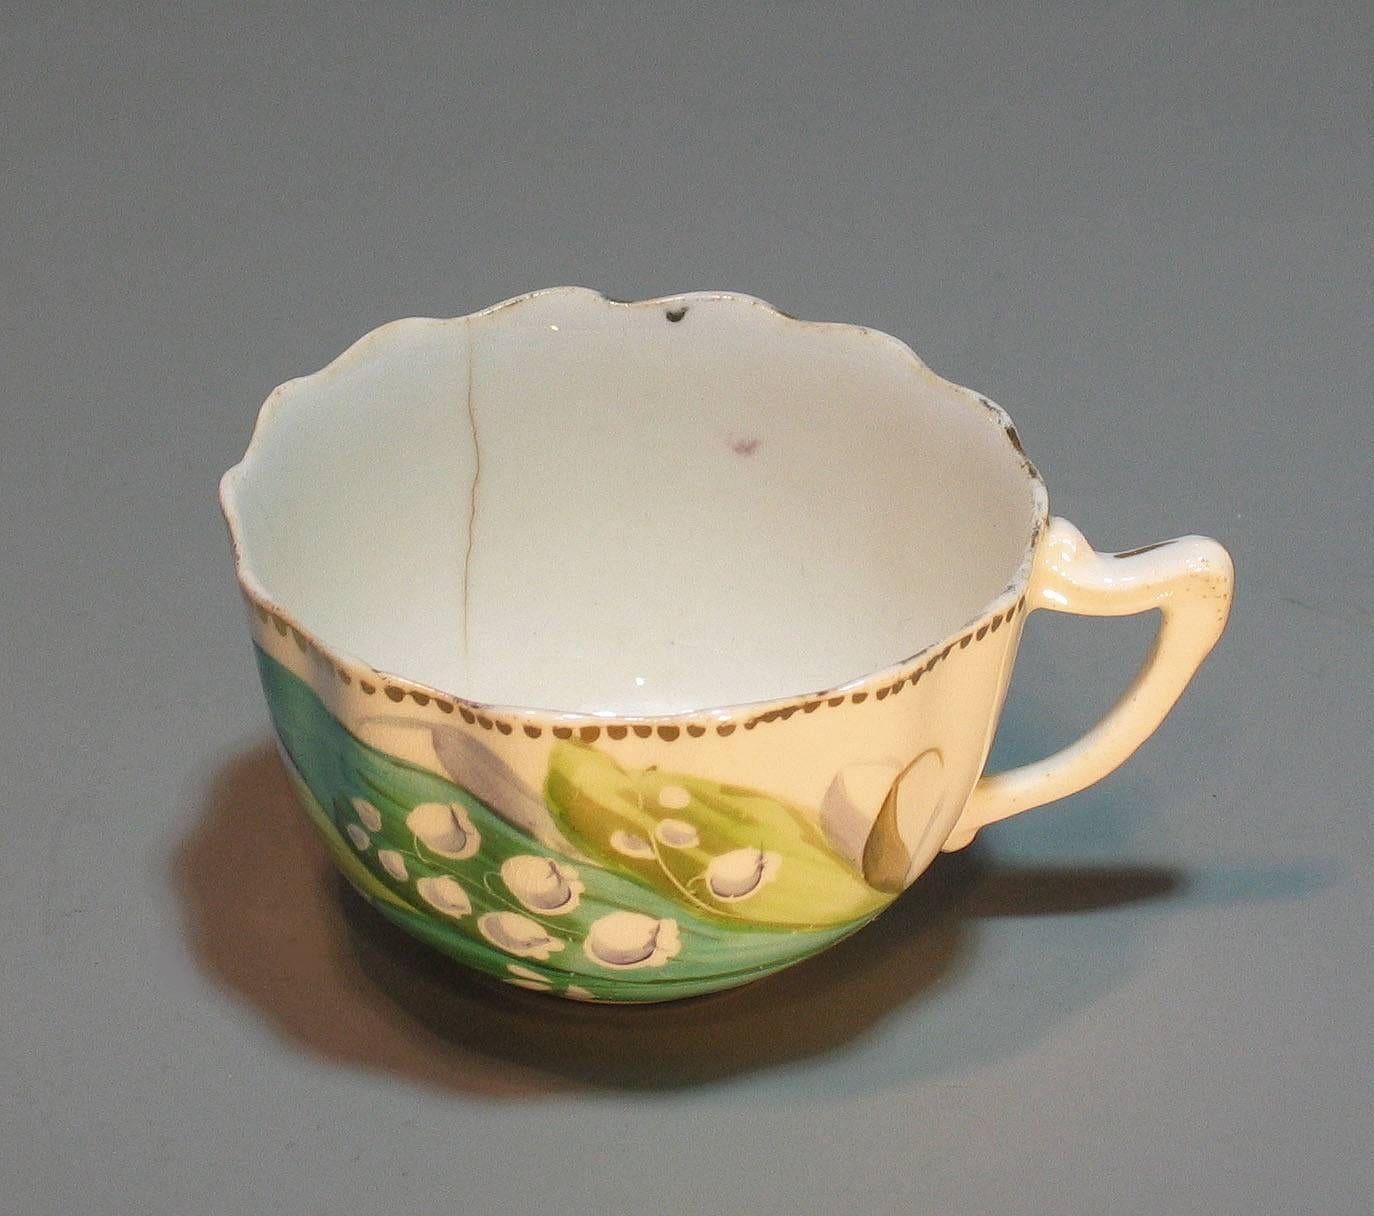 Staffordshire Porcelain Part Tea and Dessert Service, First Half of 19th Century 2